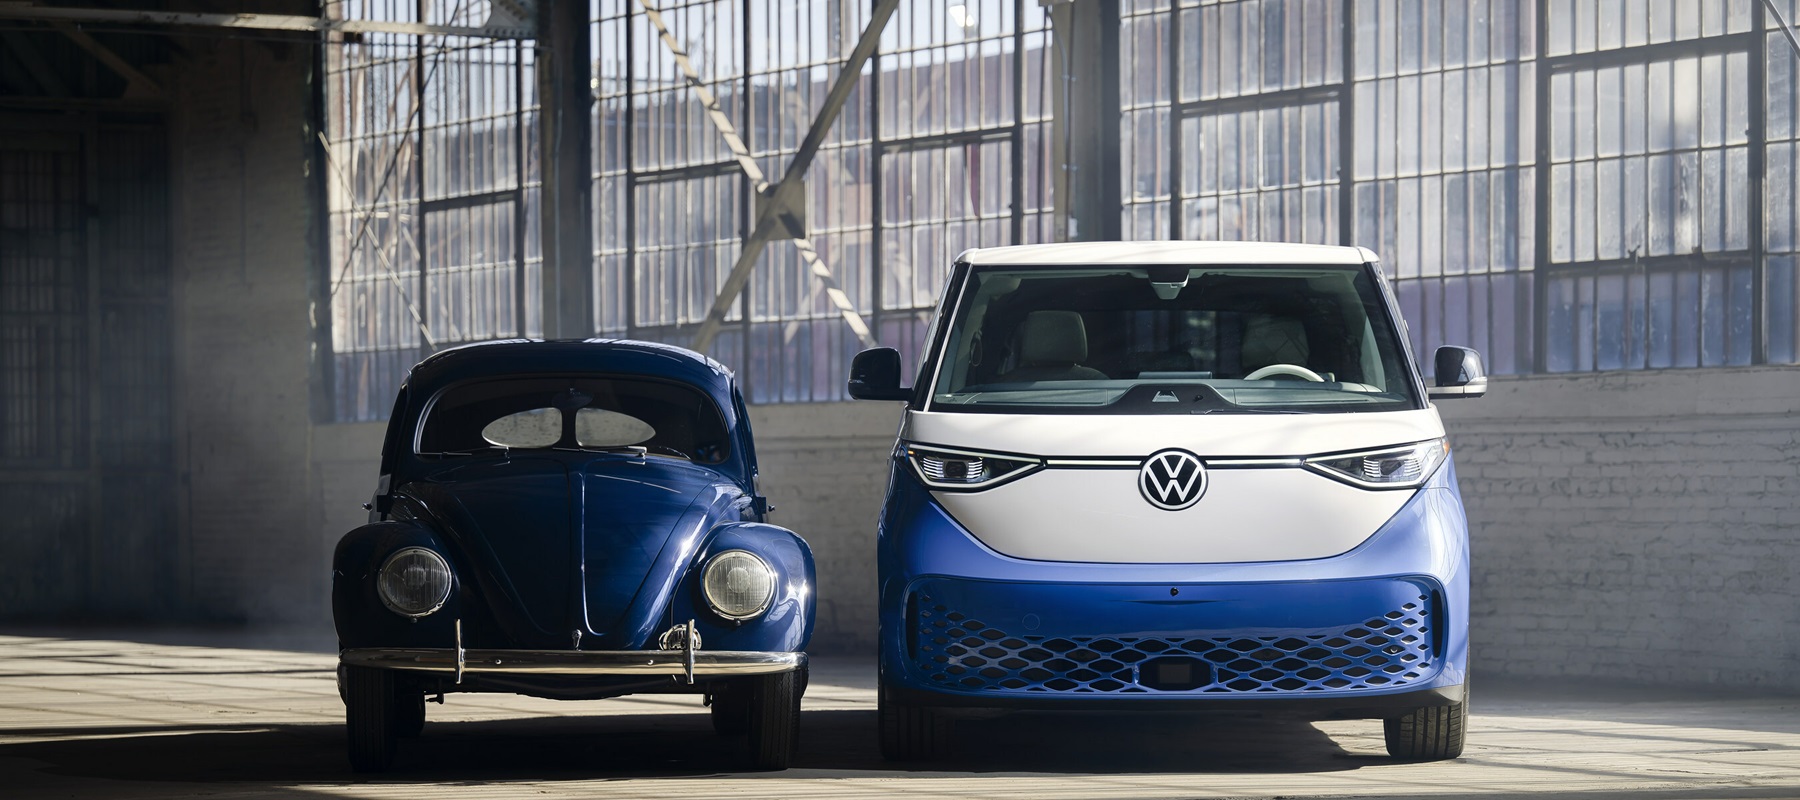 Volkswagen commemorates 75th anniversary of the brand in the US with year-long campaign